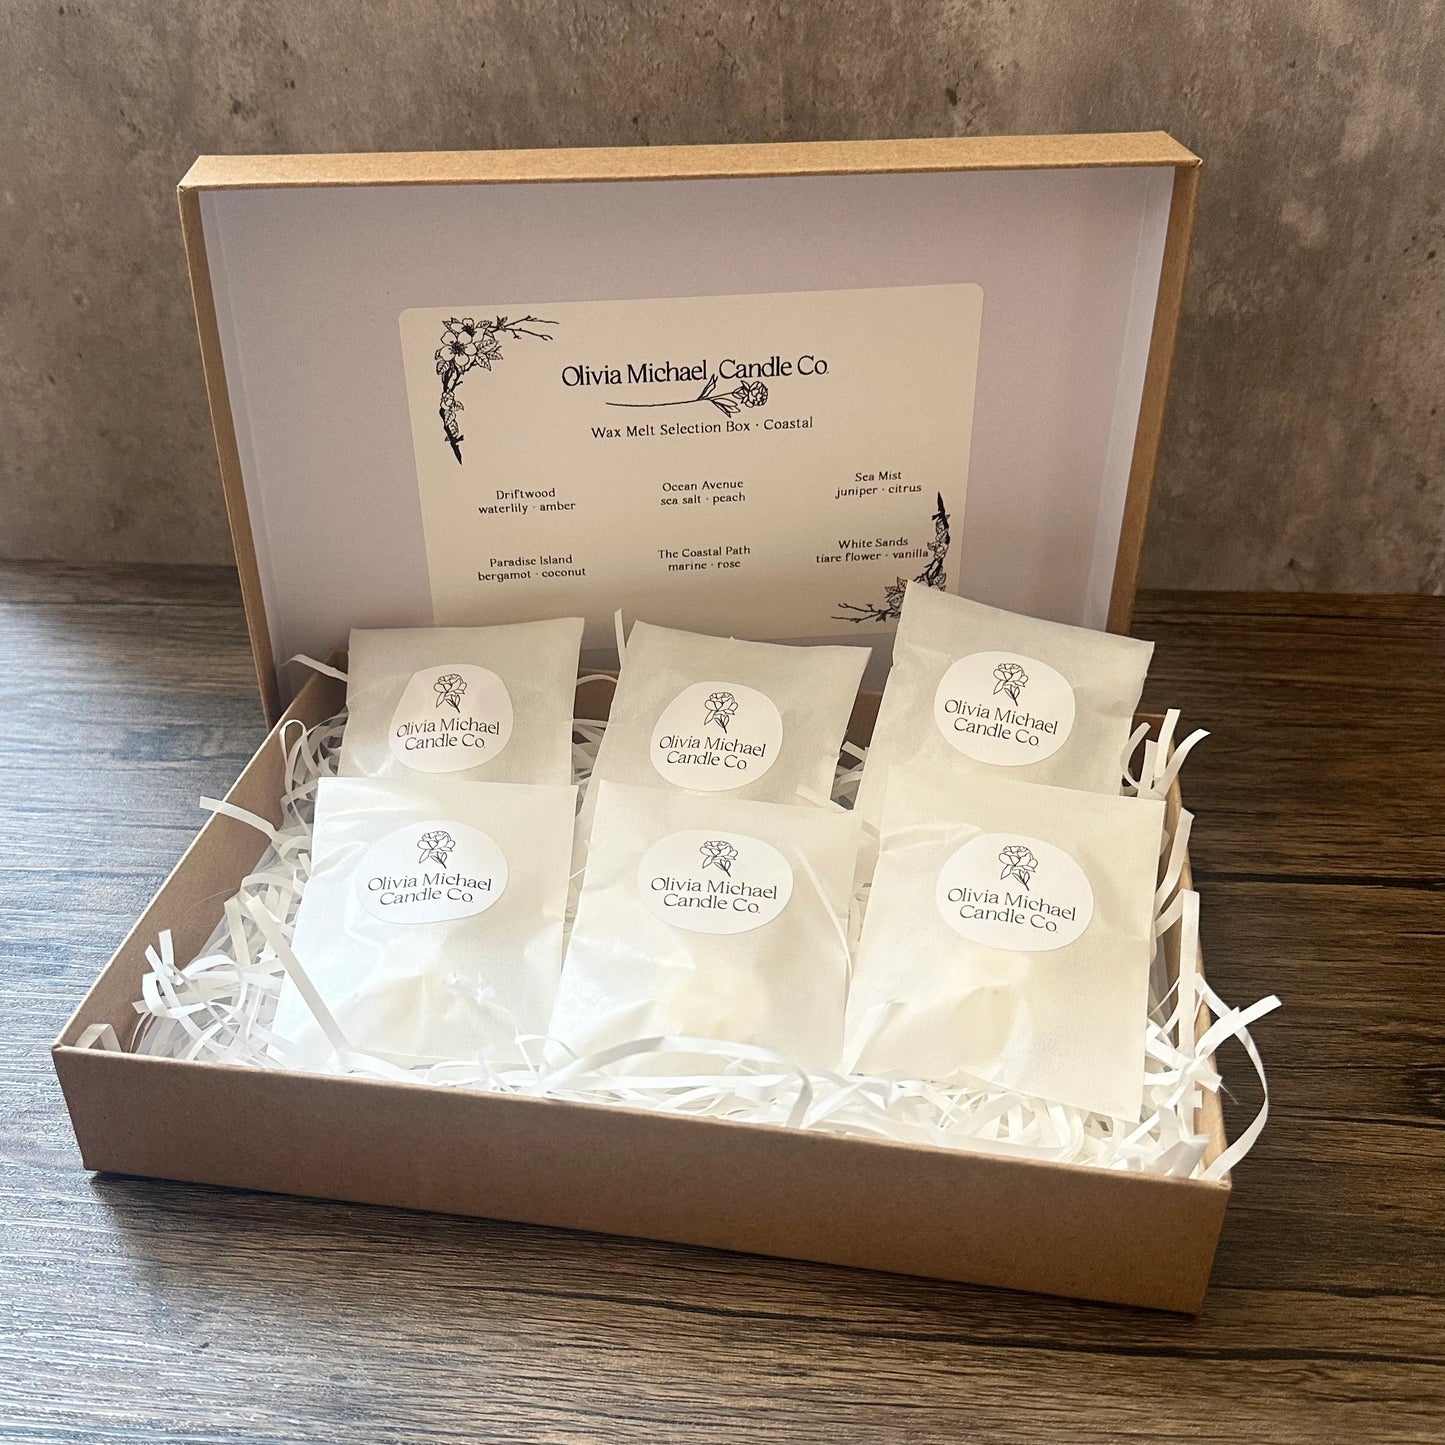 Our wax melt discovery box open with a pack of six coastal scents inside